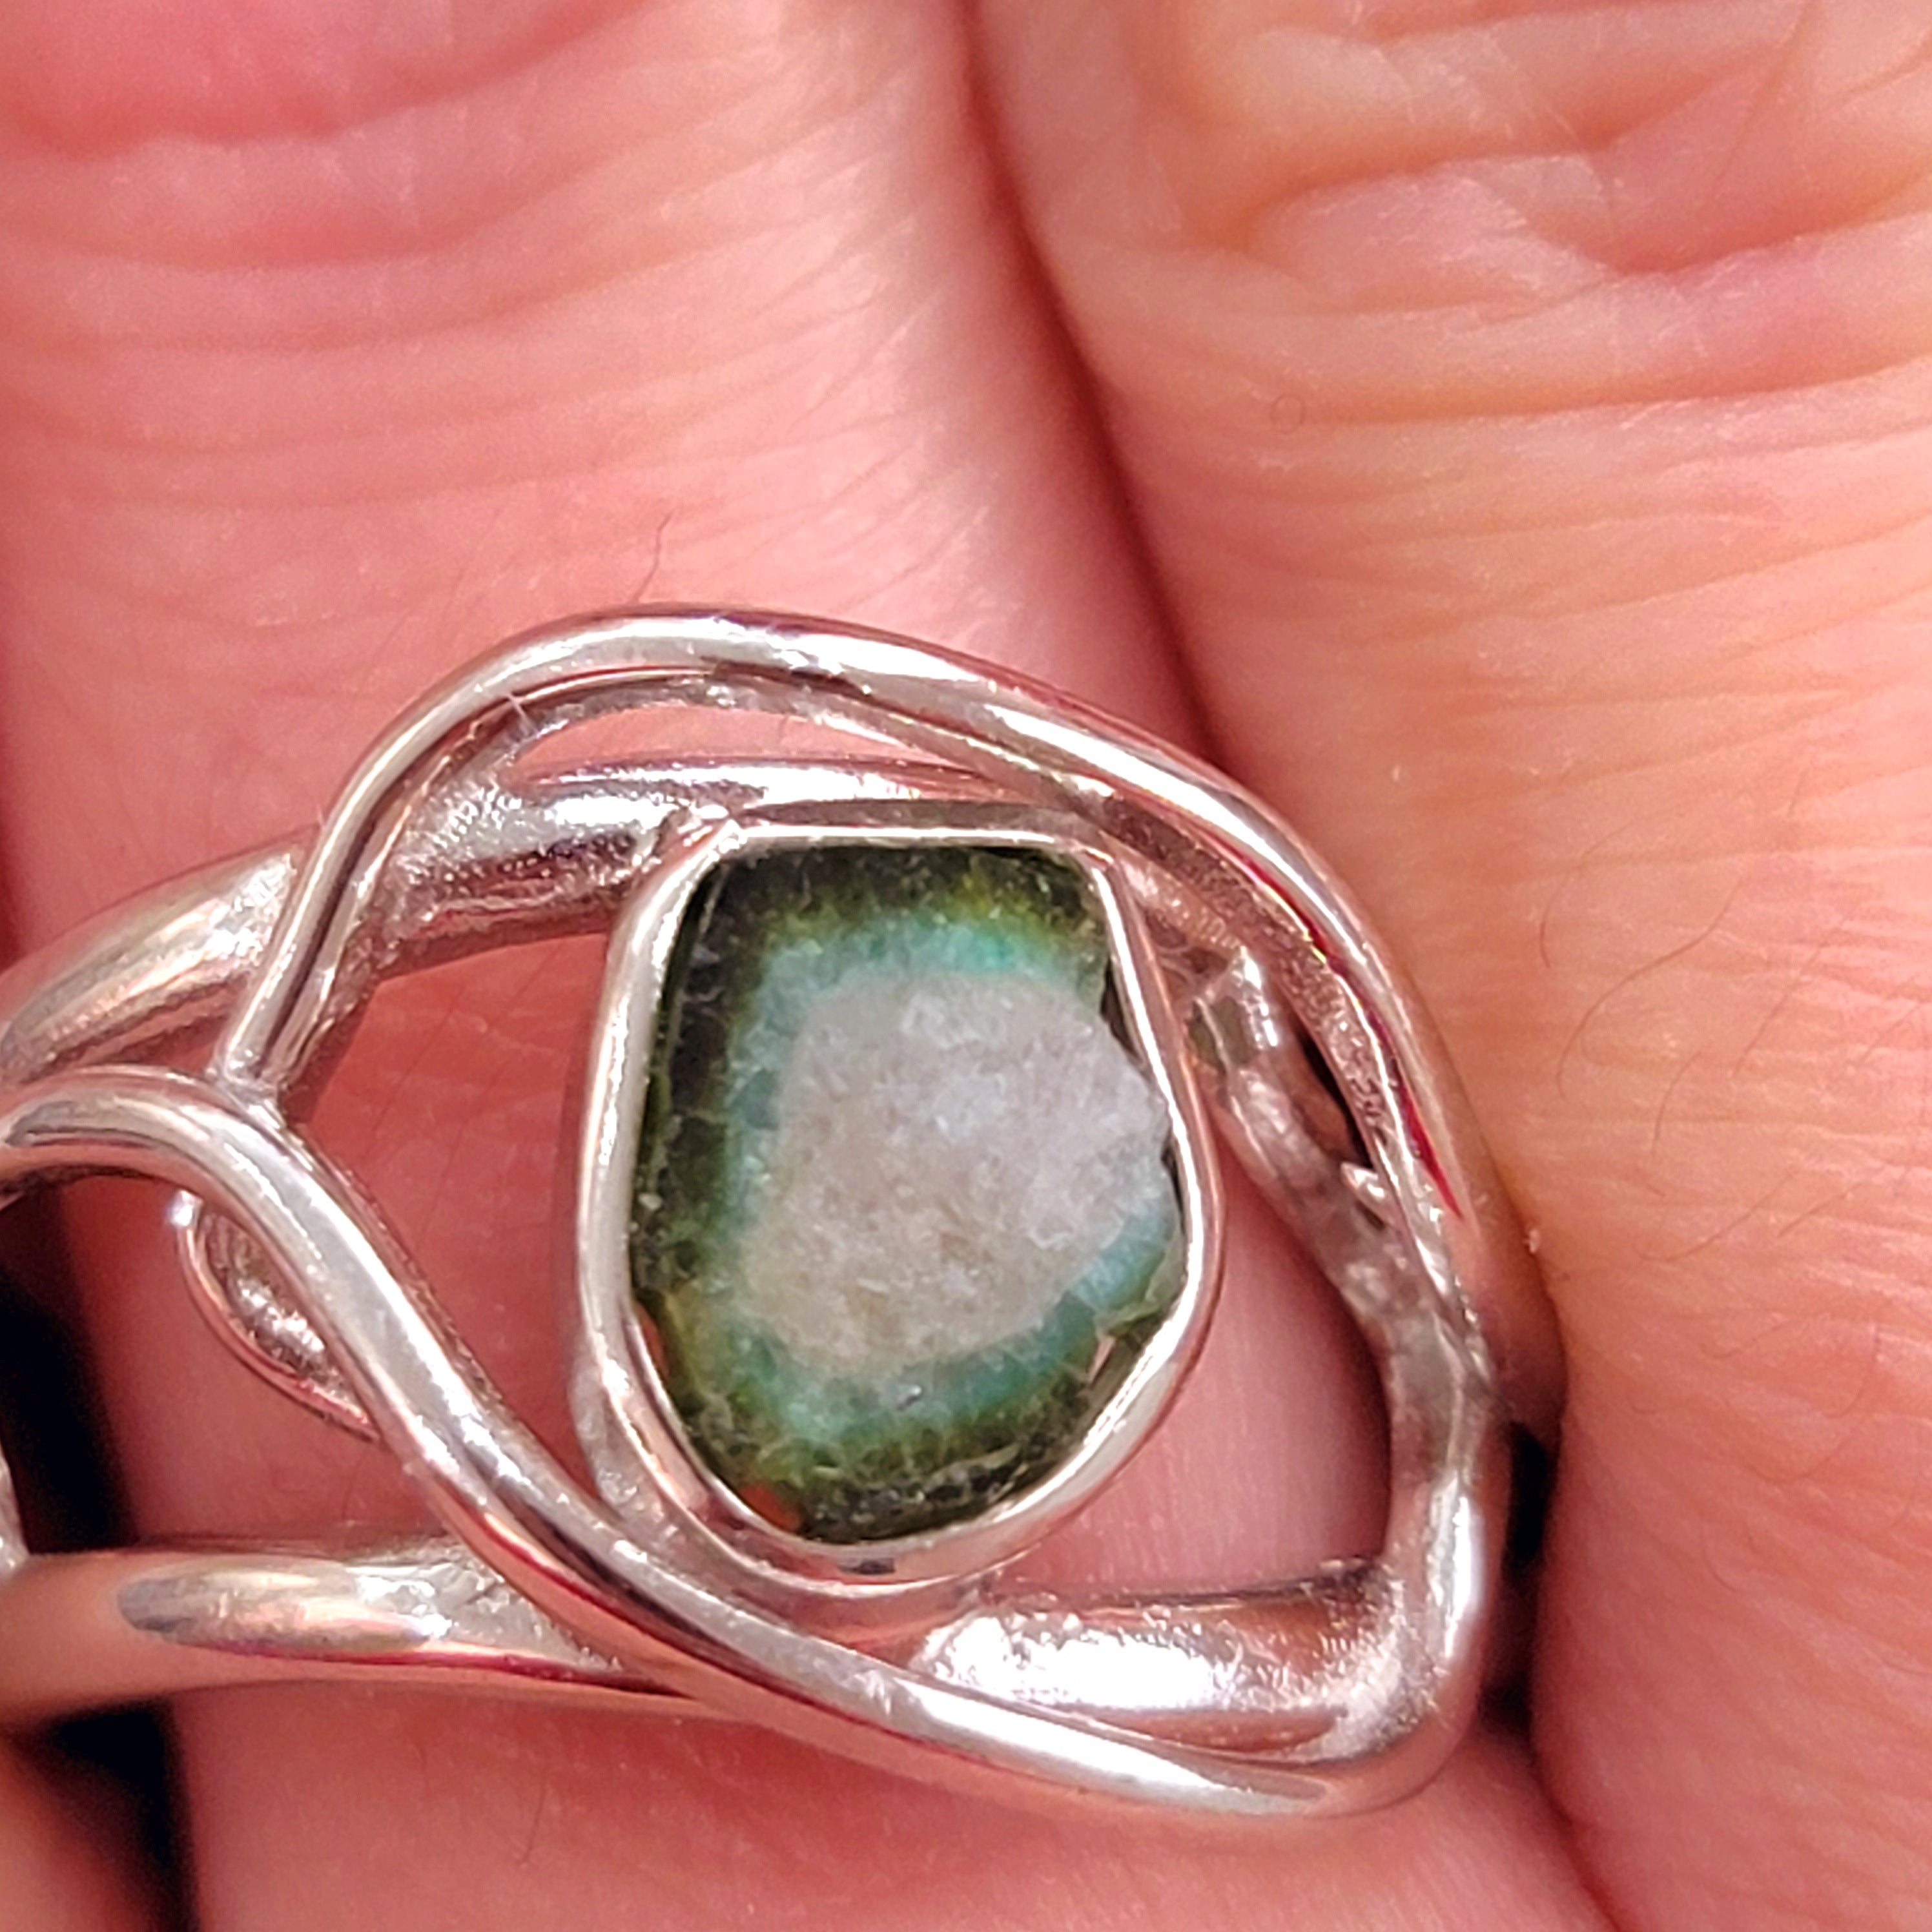 Green and Blue Bicolor Paraiba Tourmaline Adjustable Finger Ring for Healing, Joy and Love